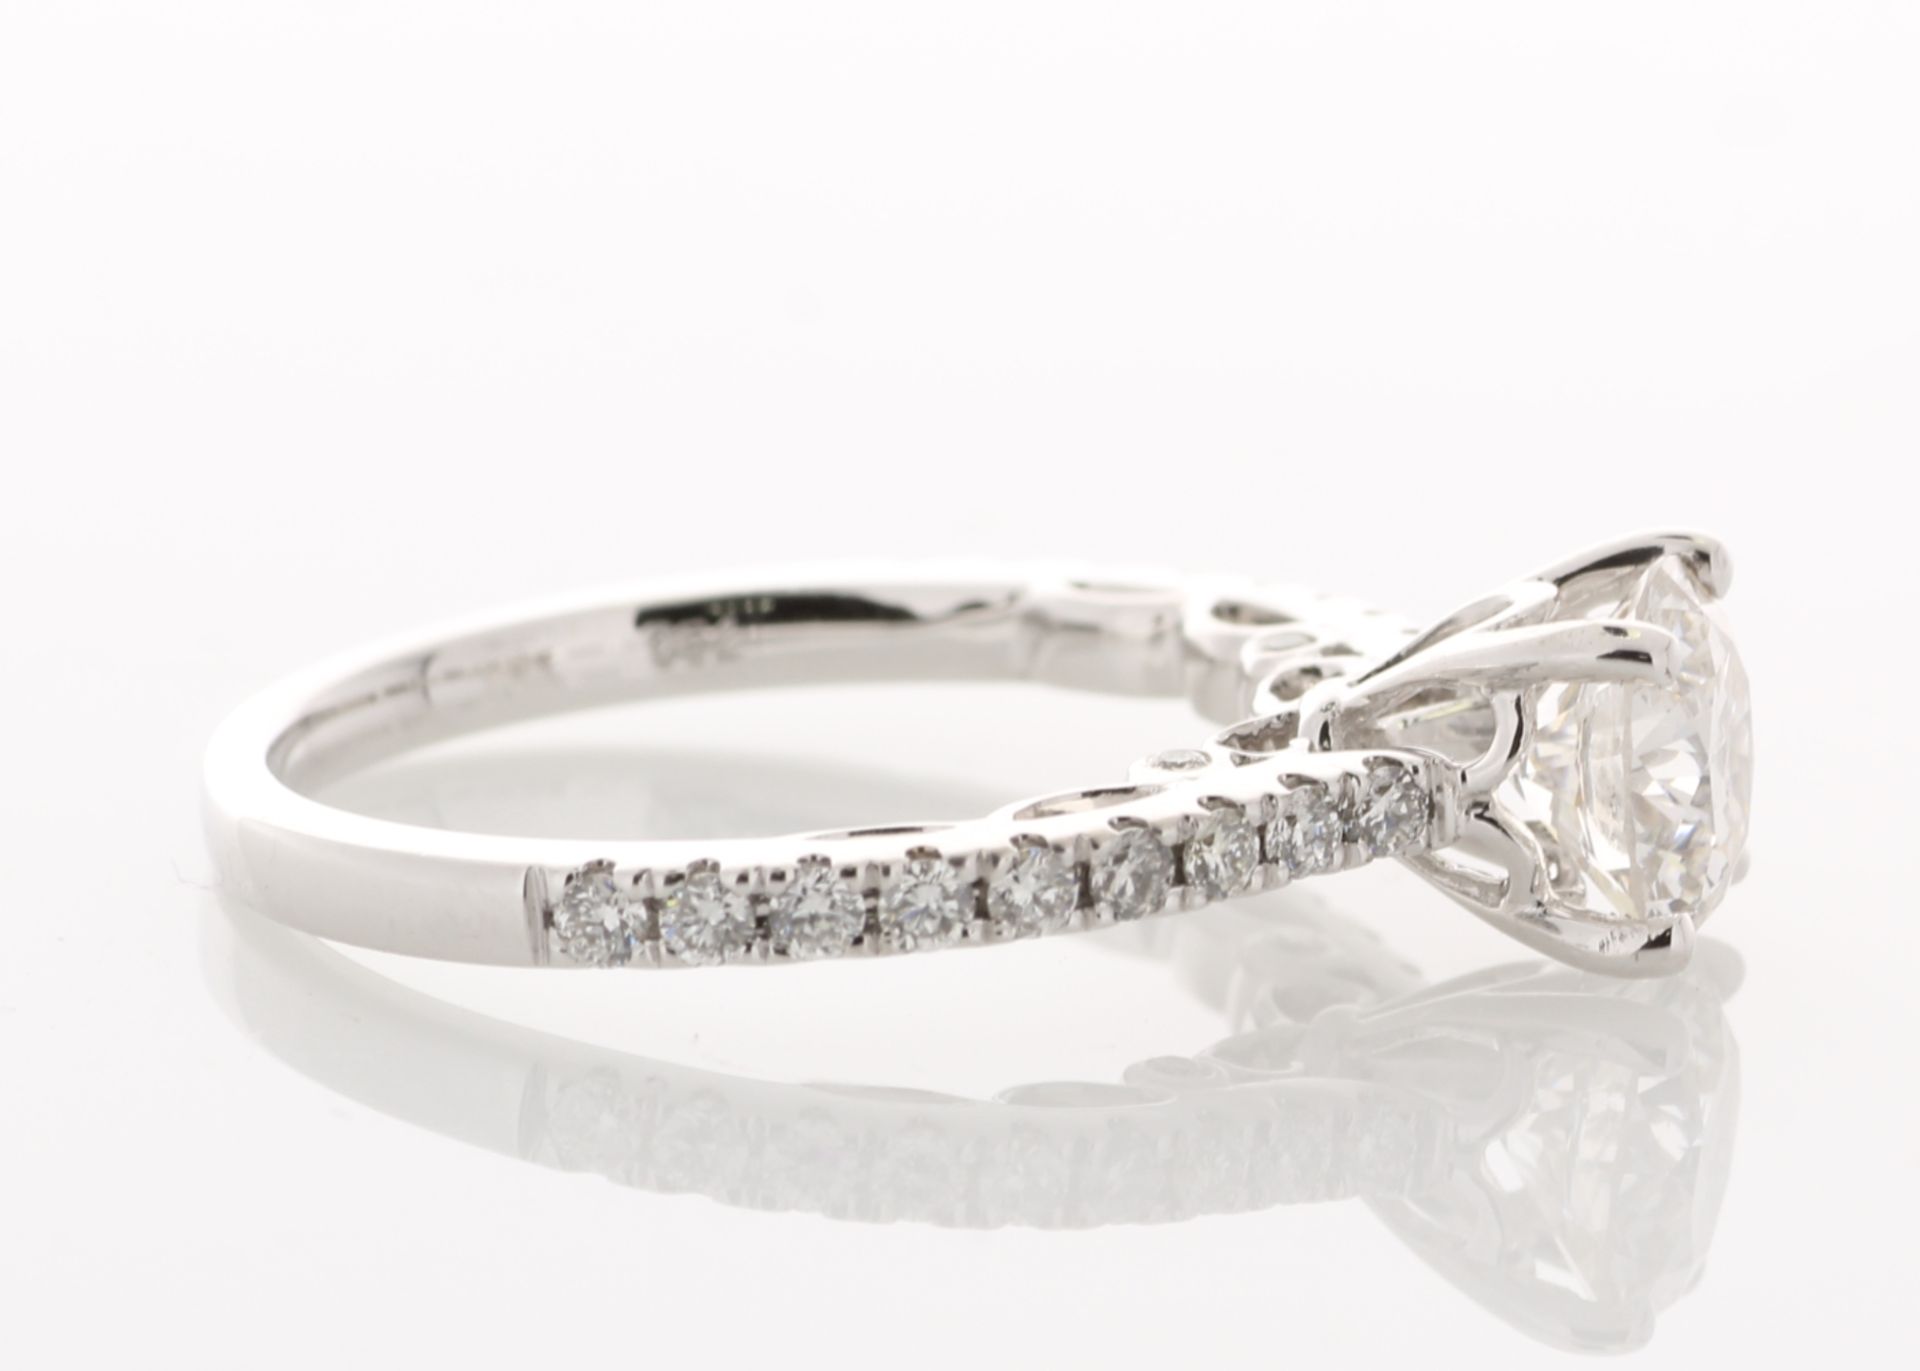 18ct White Gold Diamond Ring With Stone Set Shoulders 1.46 Carats - Valued By IDI £24,950.00 - A - Image 4 of 6